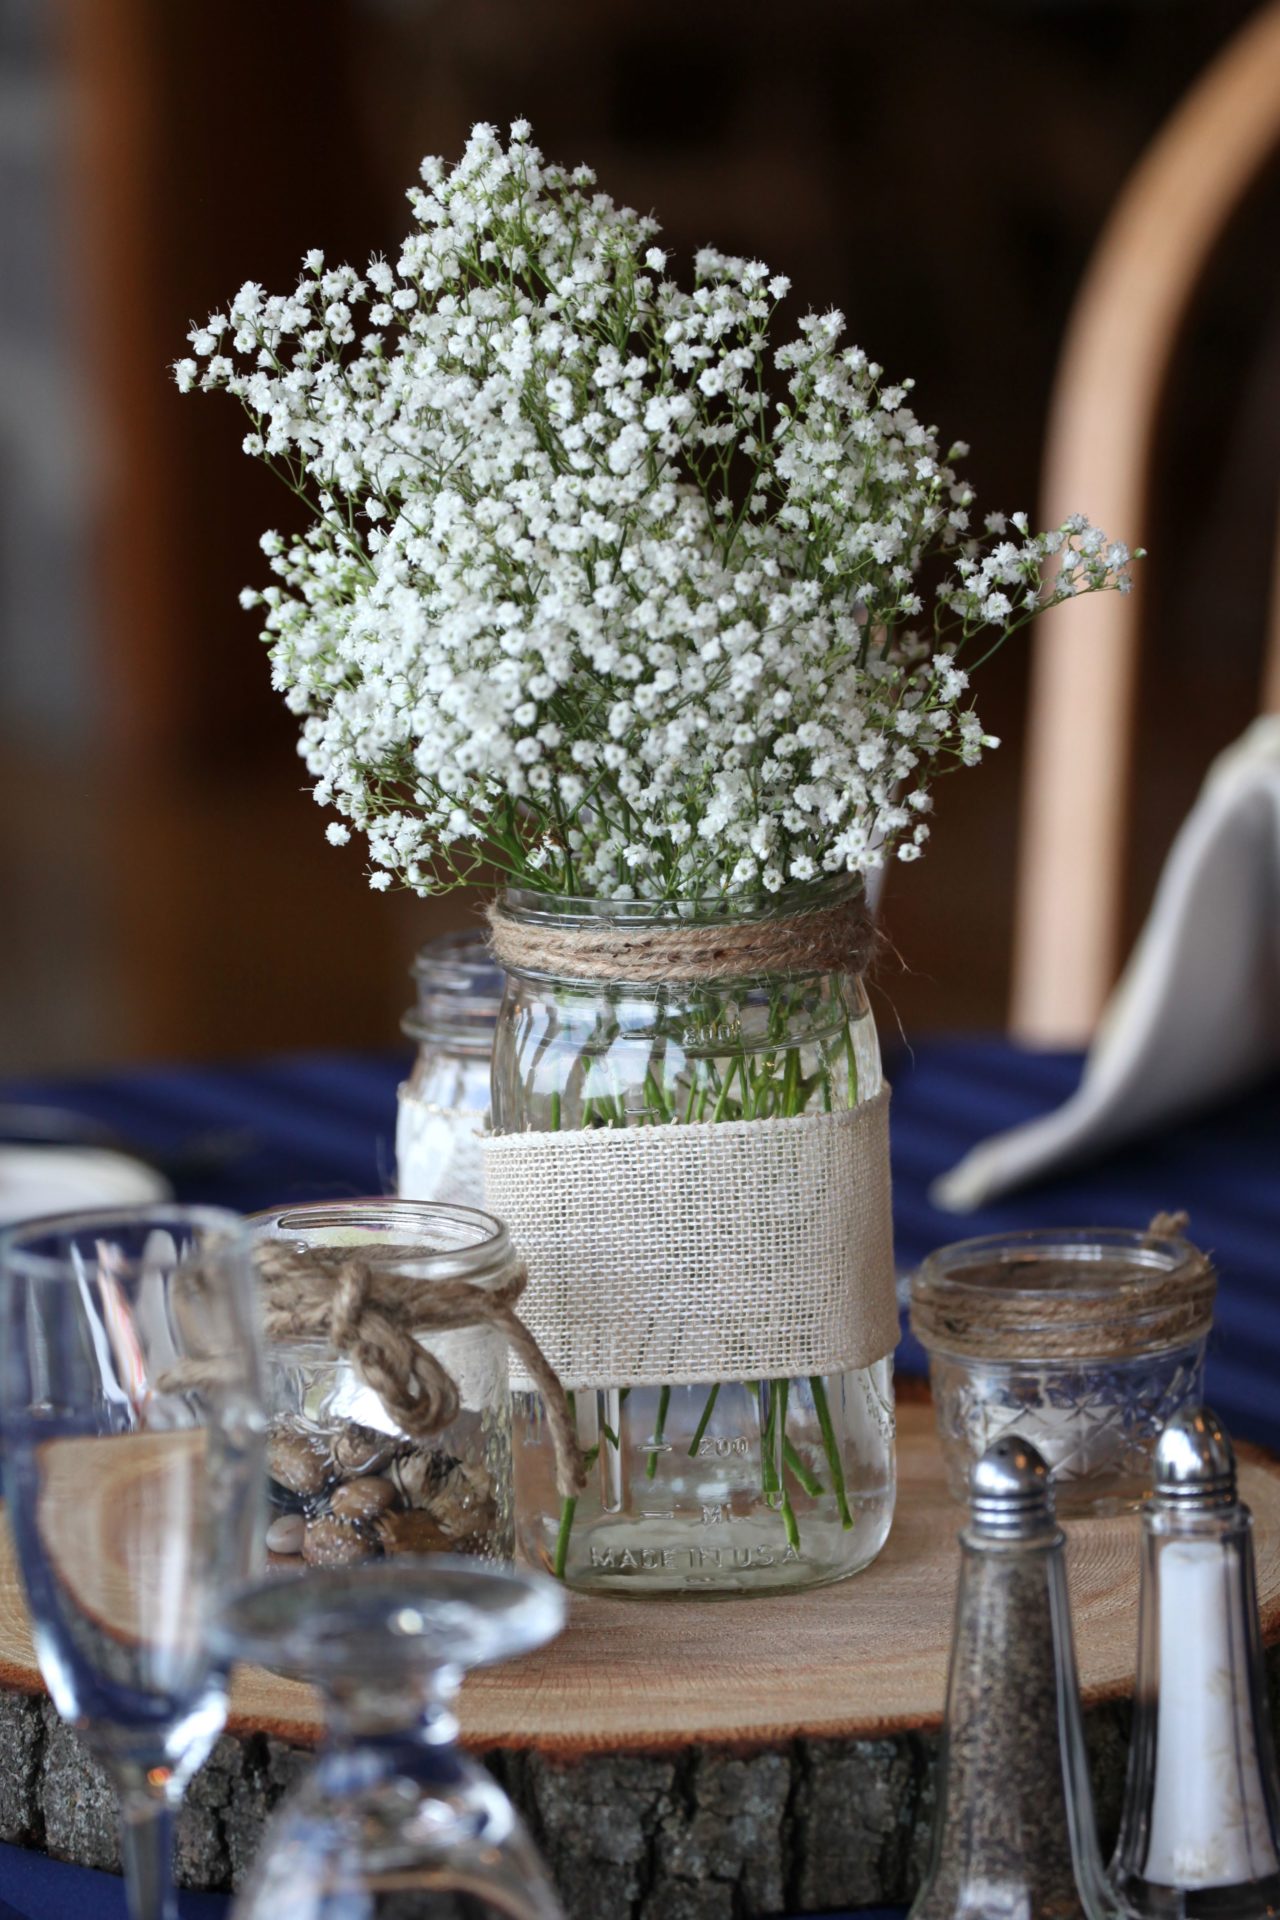 Rustic wedding centerpiece with jar and baby's breath flowers